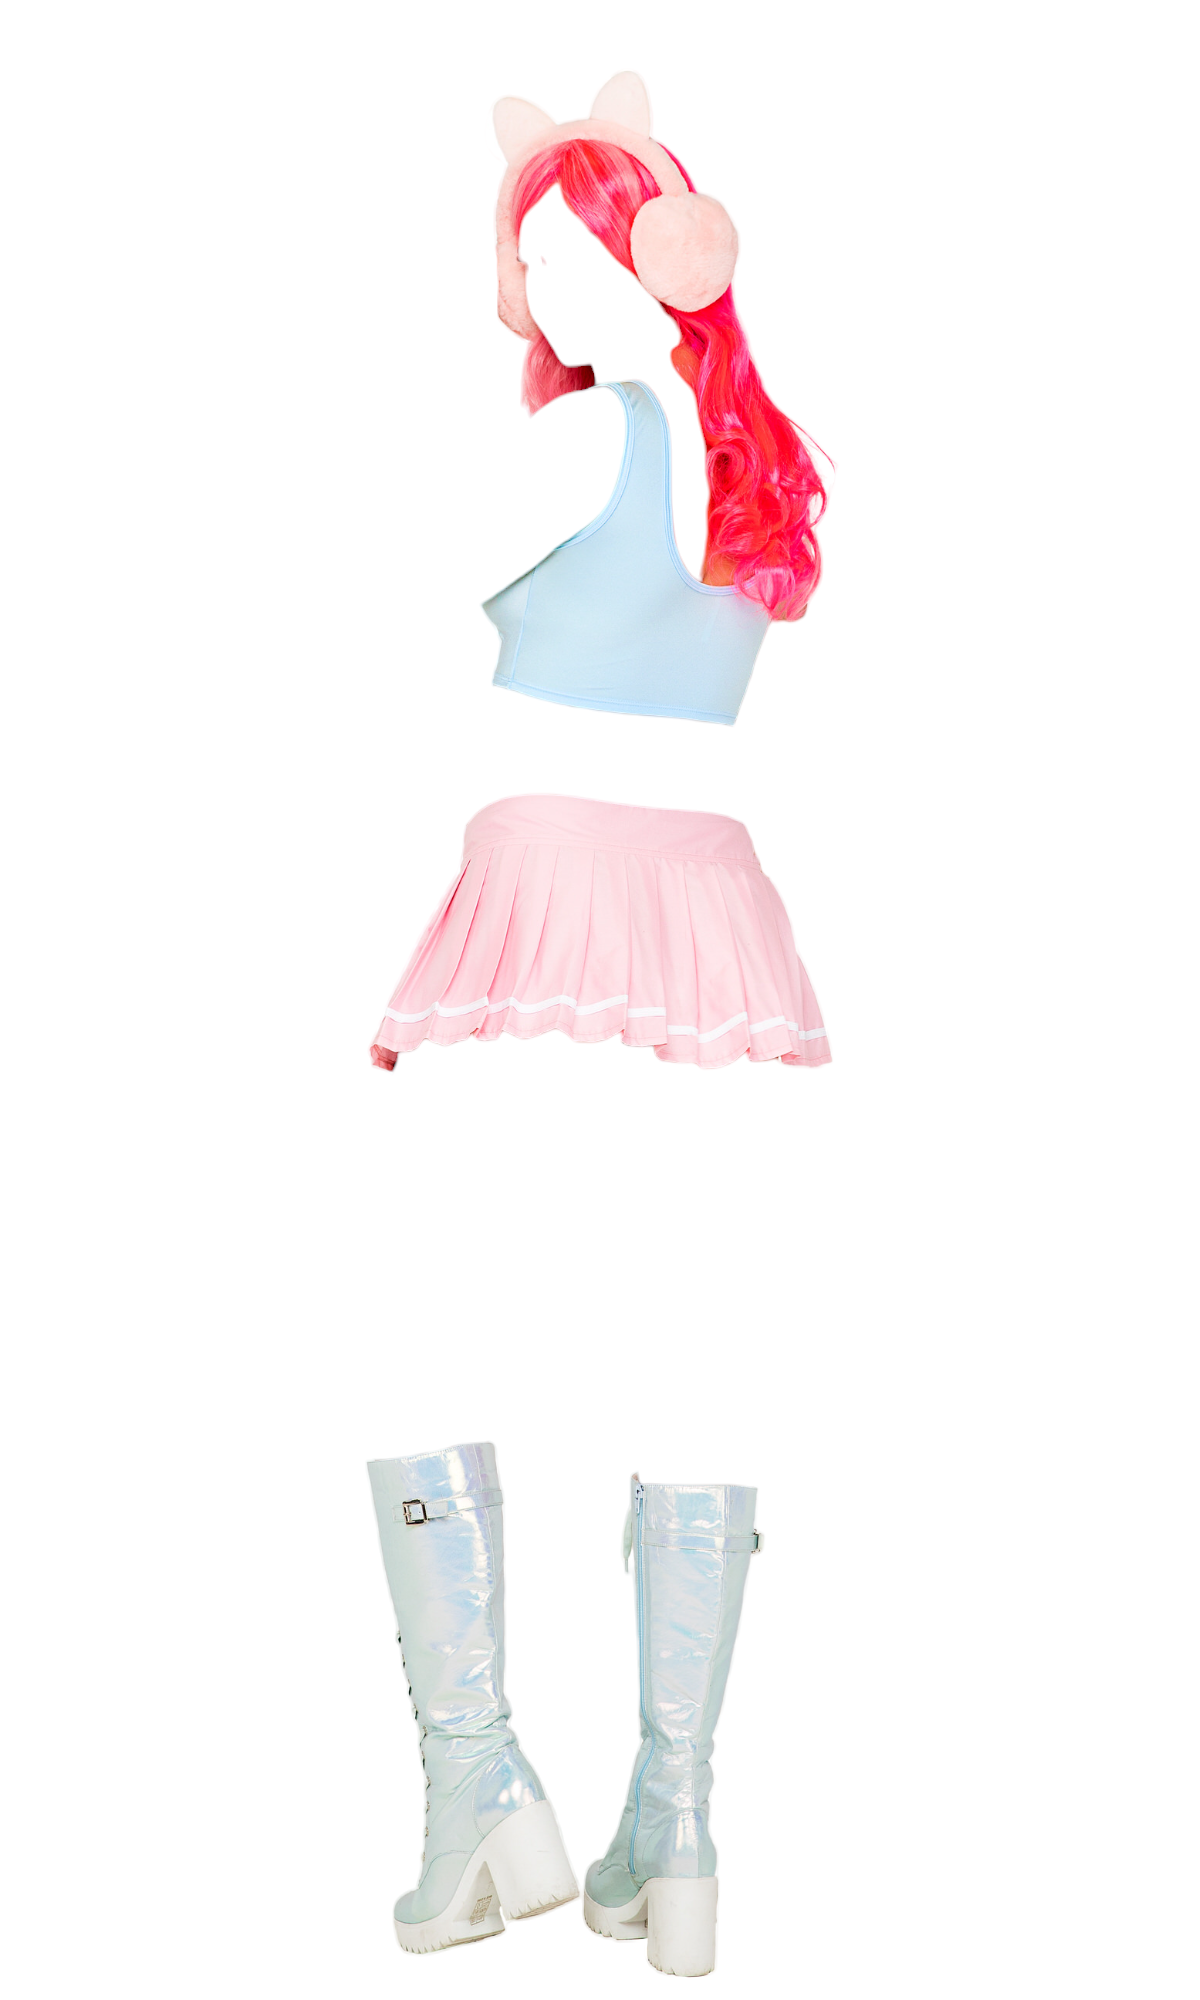 Roma Costume 3 PC Video Game Doll Crop Top & Pleated Skirt Pink/Blue